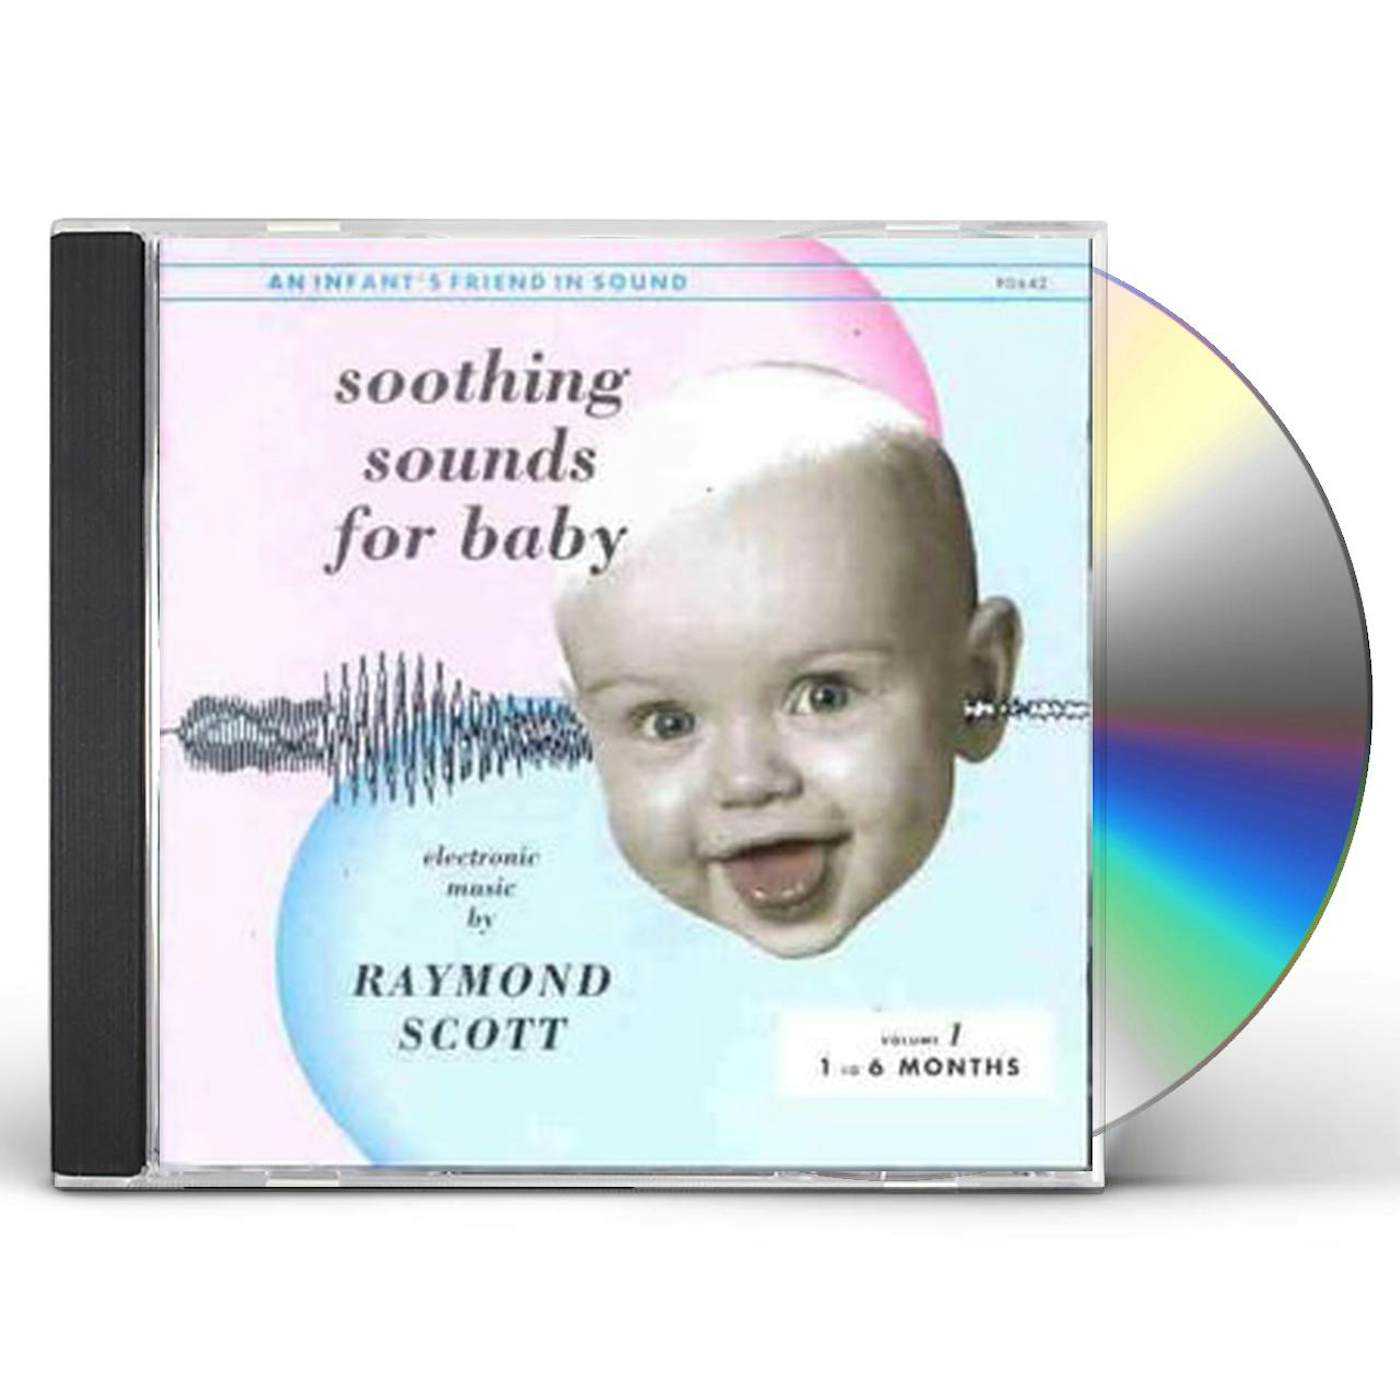 Raymond Scott SOOTHING SOUNDS FOR BABY 1 CD